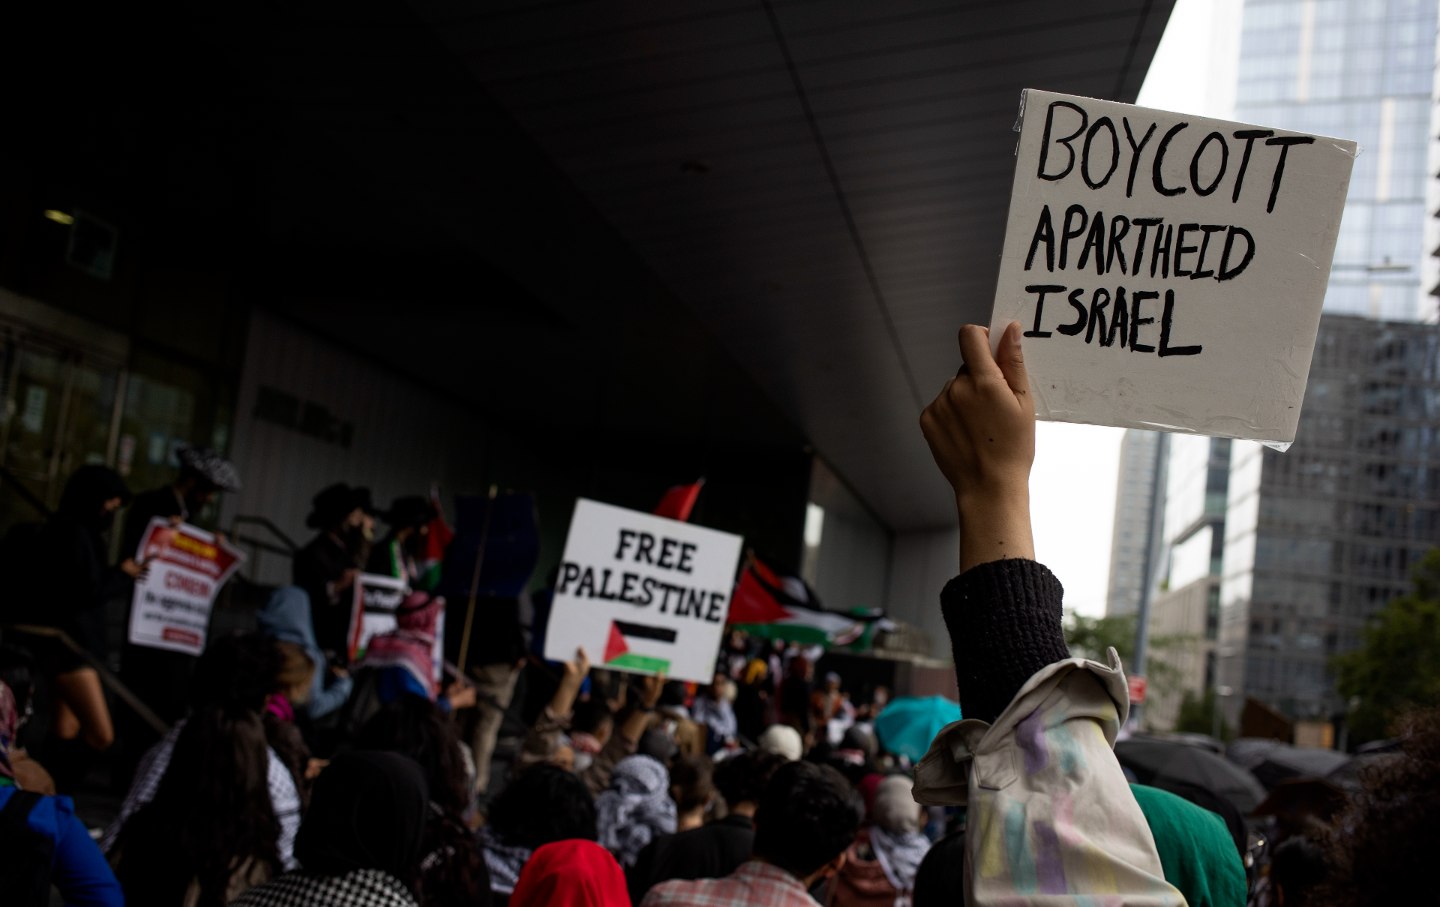 CUNY students hold a rally to protest the Israeli occupation of Palestine and demand that the university system divest from Israel, May 28, 2021 at John Jay College in New York City.